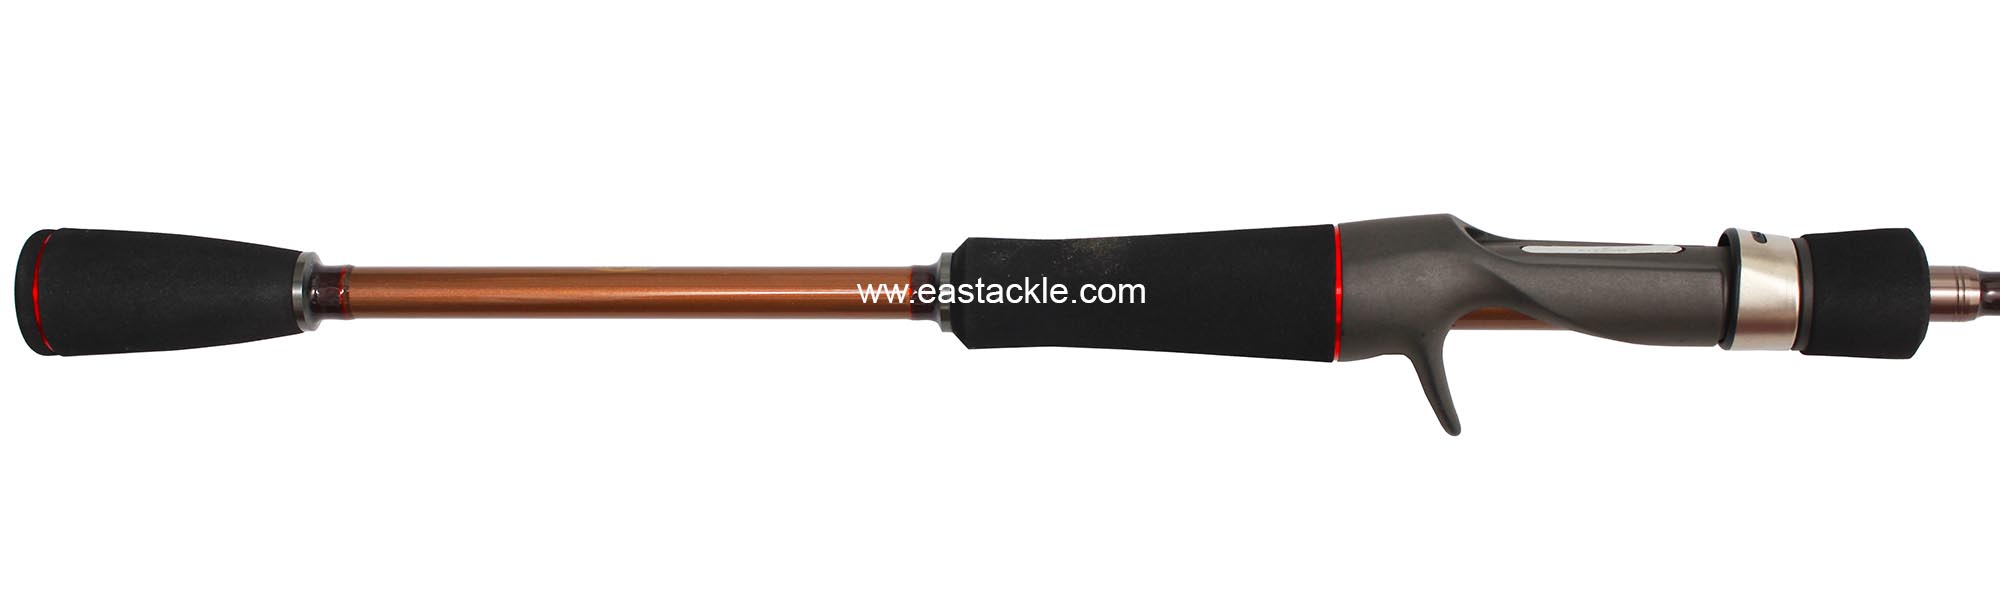 Storm - Teenie - TNC642UL - Bait Casting Rod - Handle Section (Side View) | Eastackle